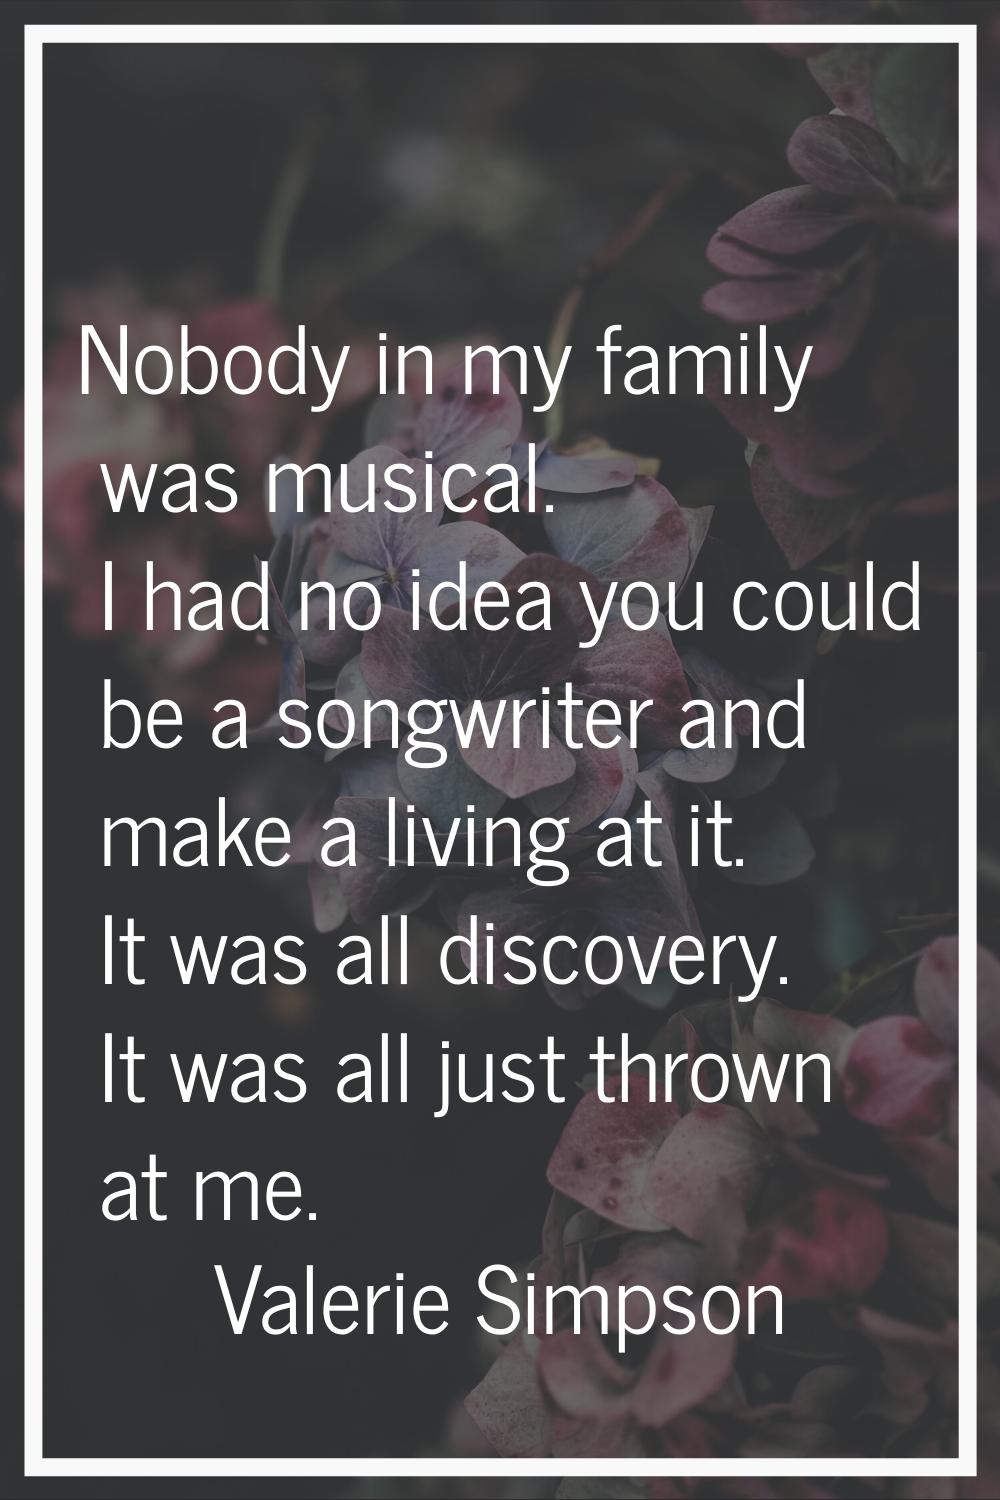 Nobody in my family was musical. I had no idea you could be a songwriter and make a living at it. I